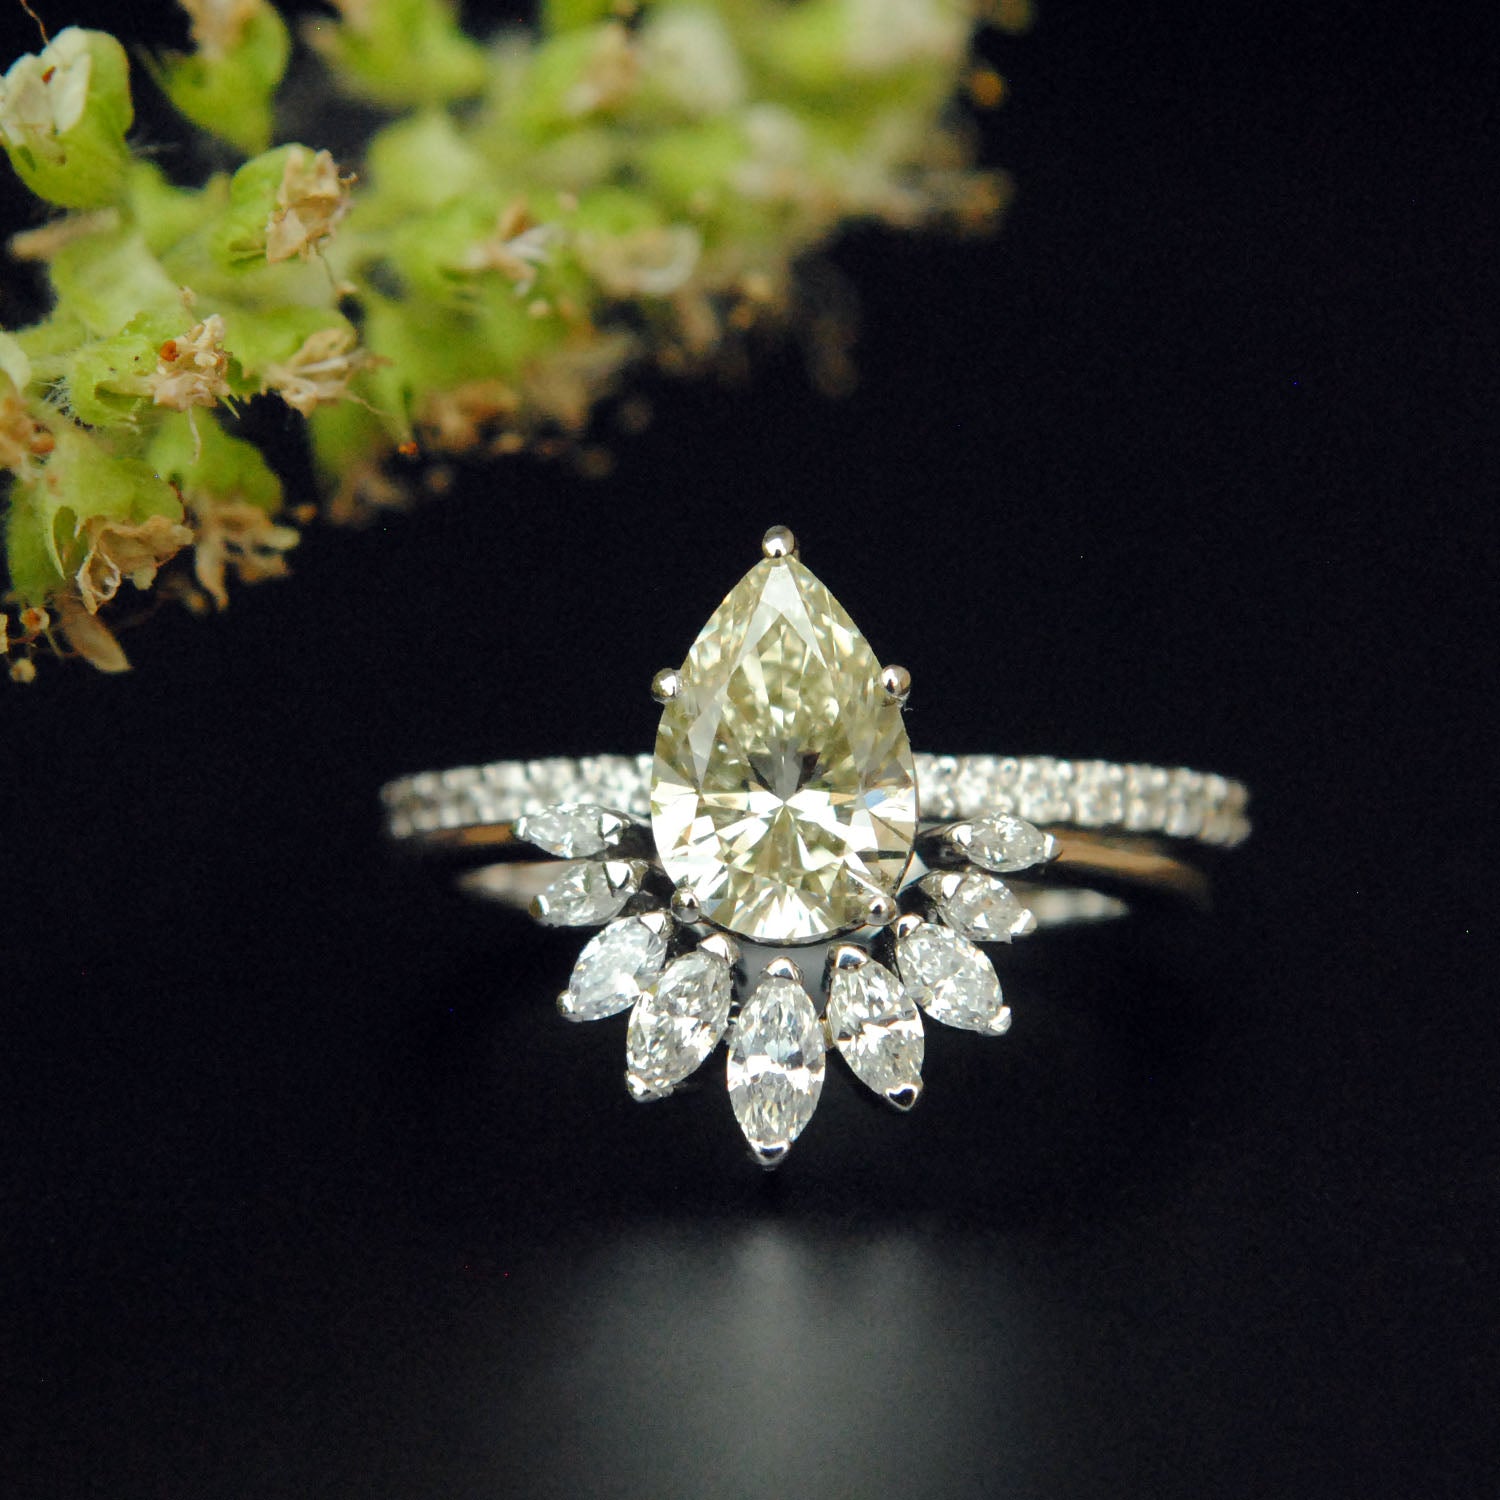 1 Carat Pear Diamond Engagement Ring with Marquise Diamond Curved Stack Wedding Band